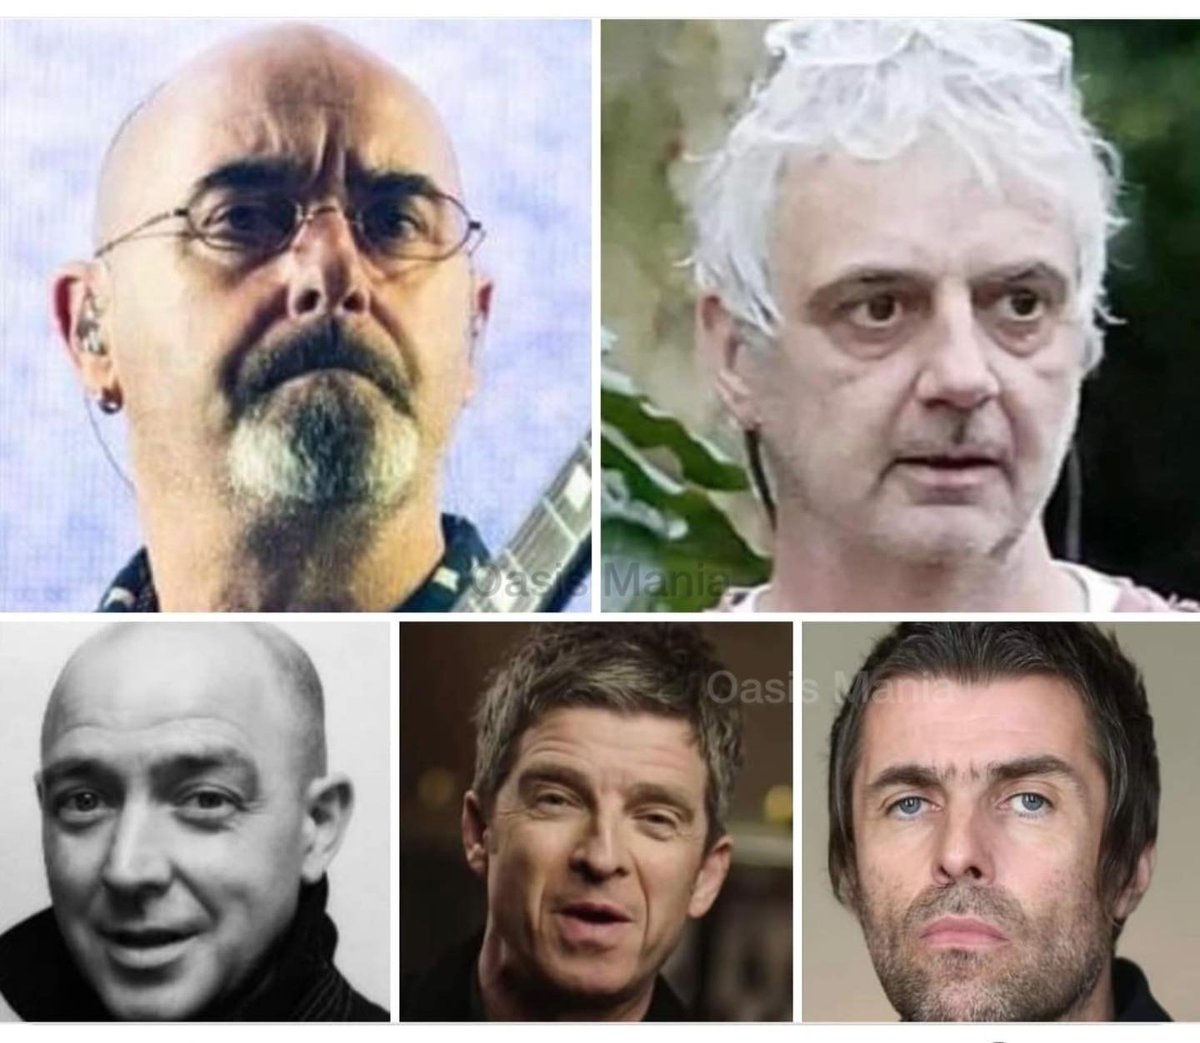 Oasis members looking good, ready for that reunion! 📷